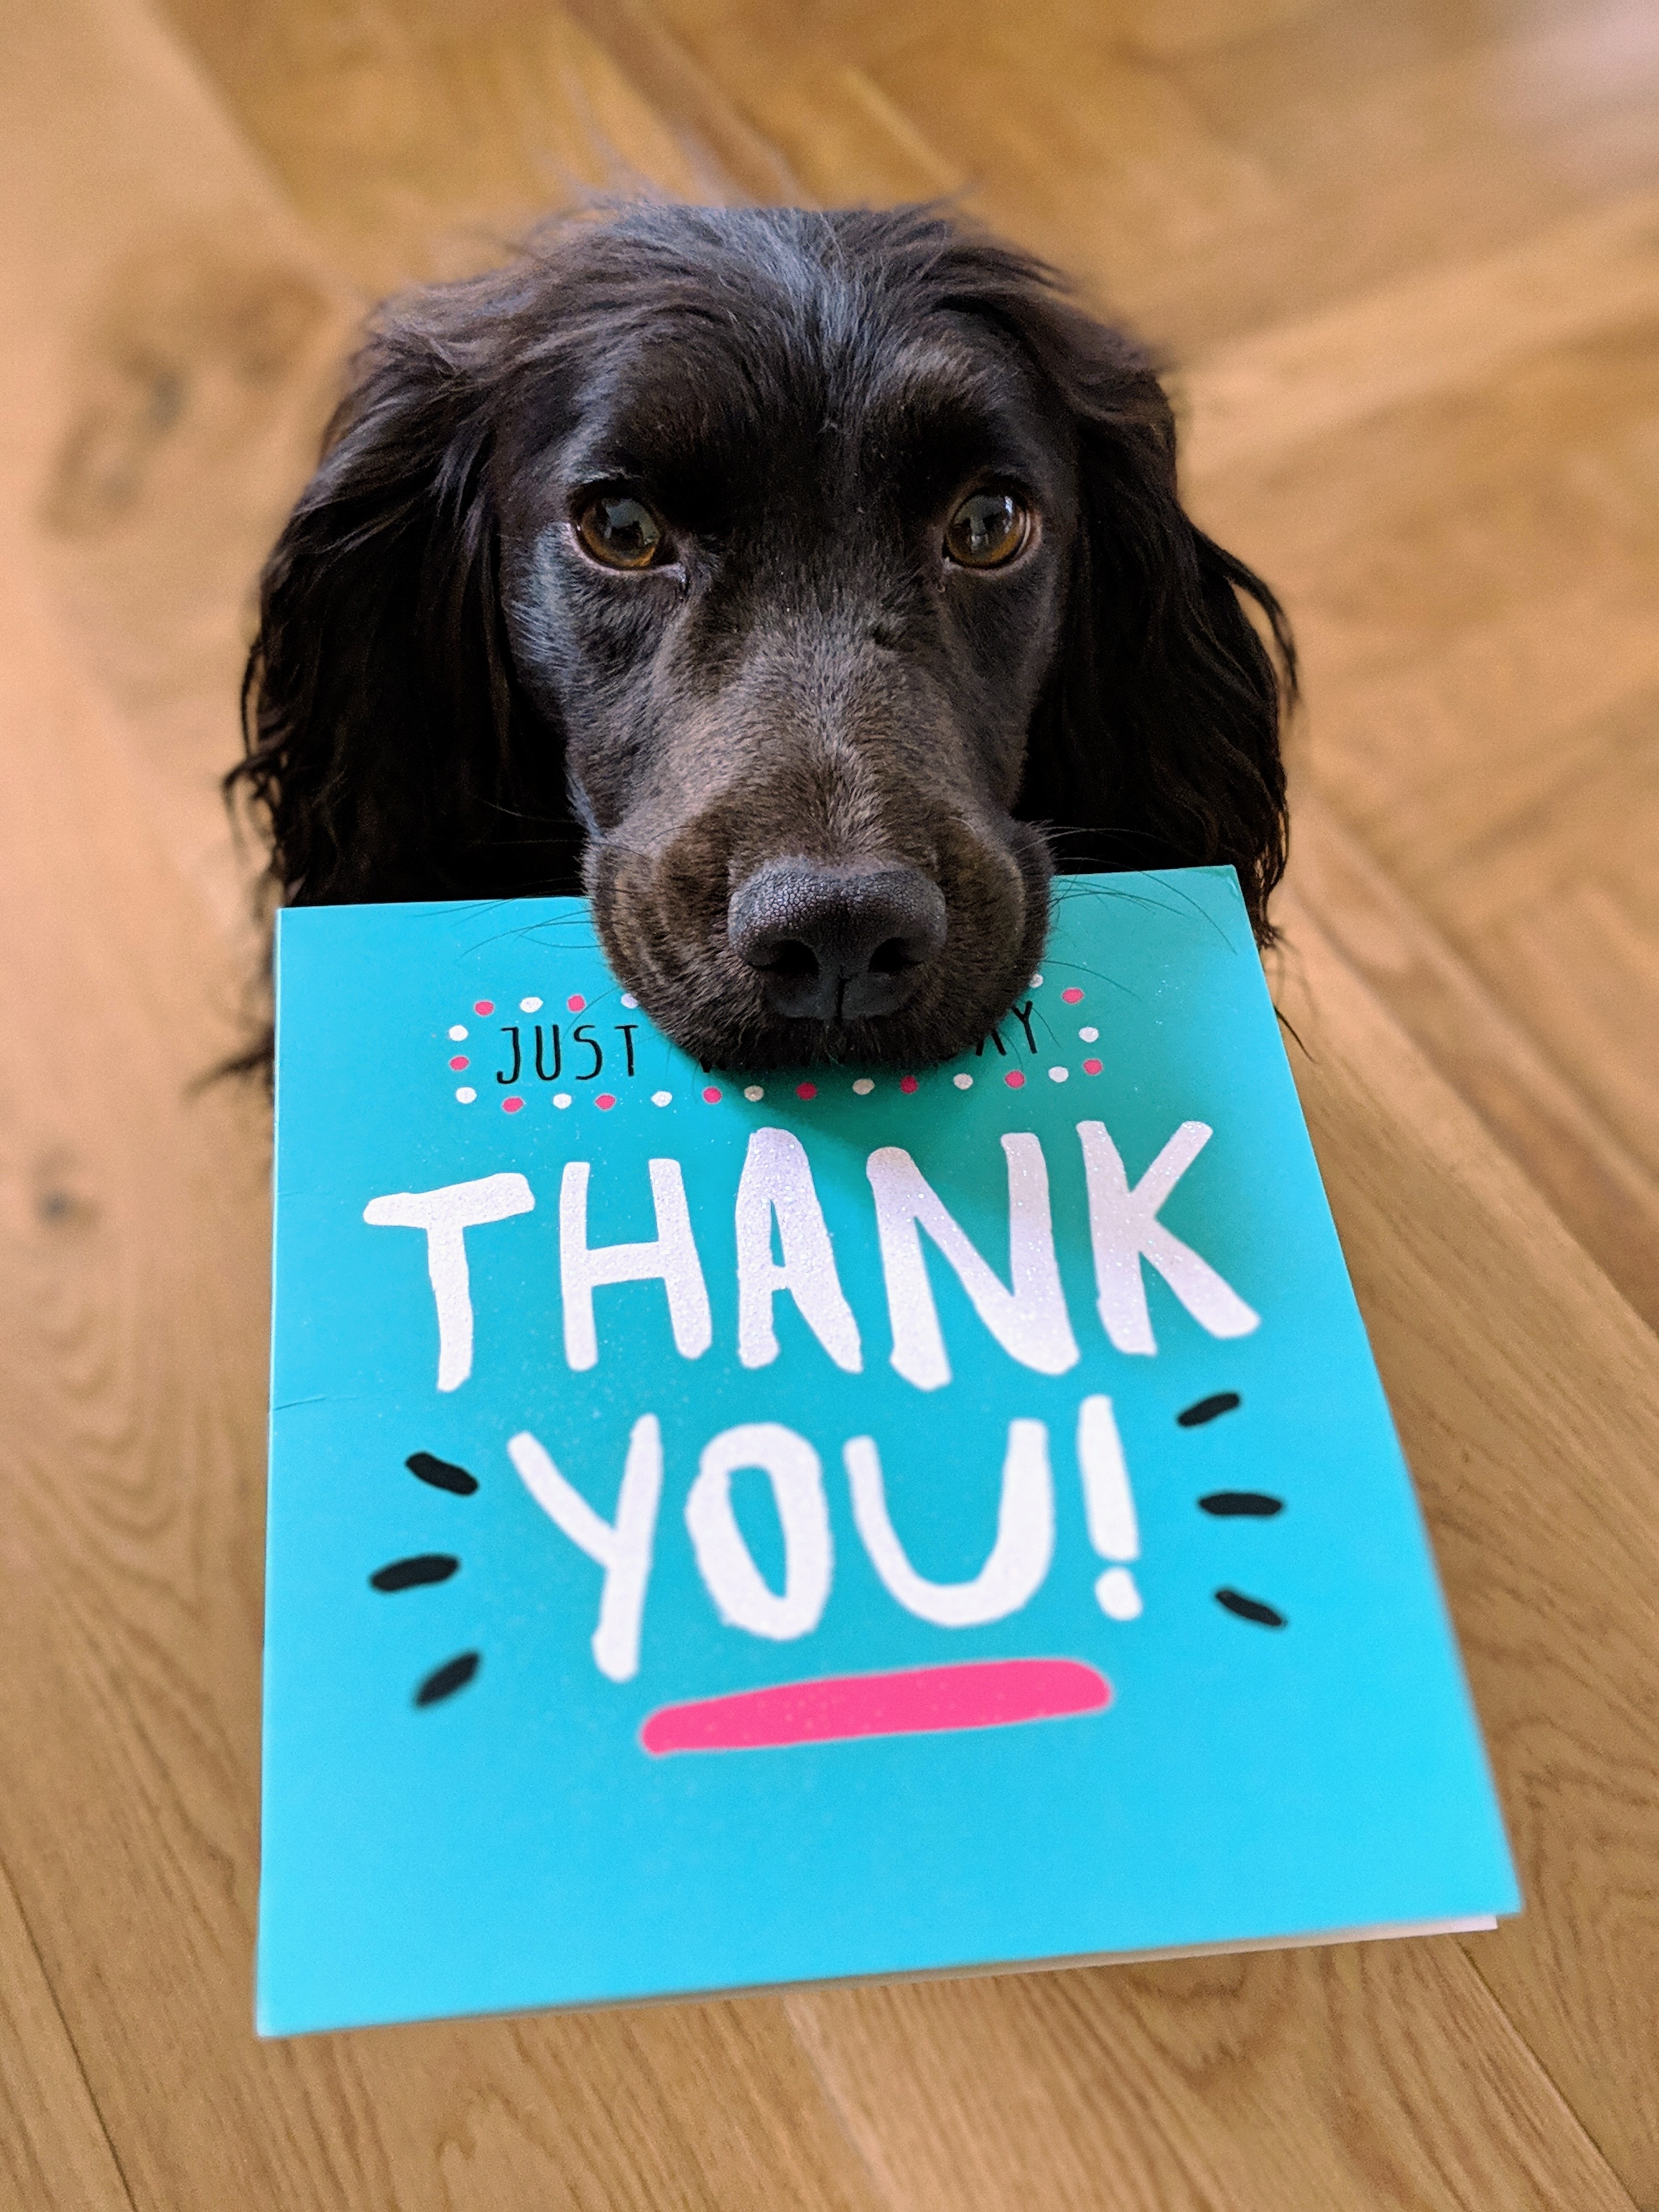 black dog holding card that says thank you